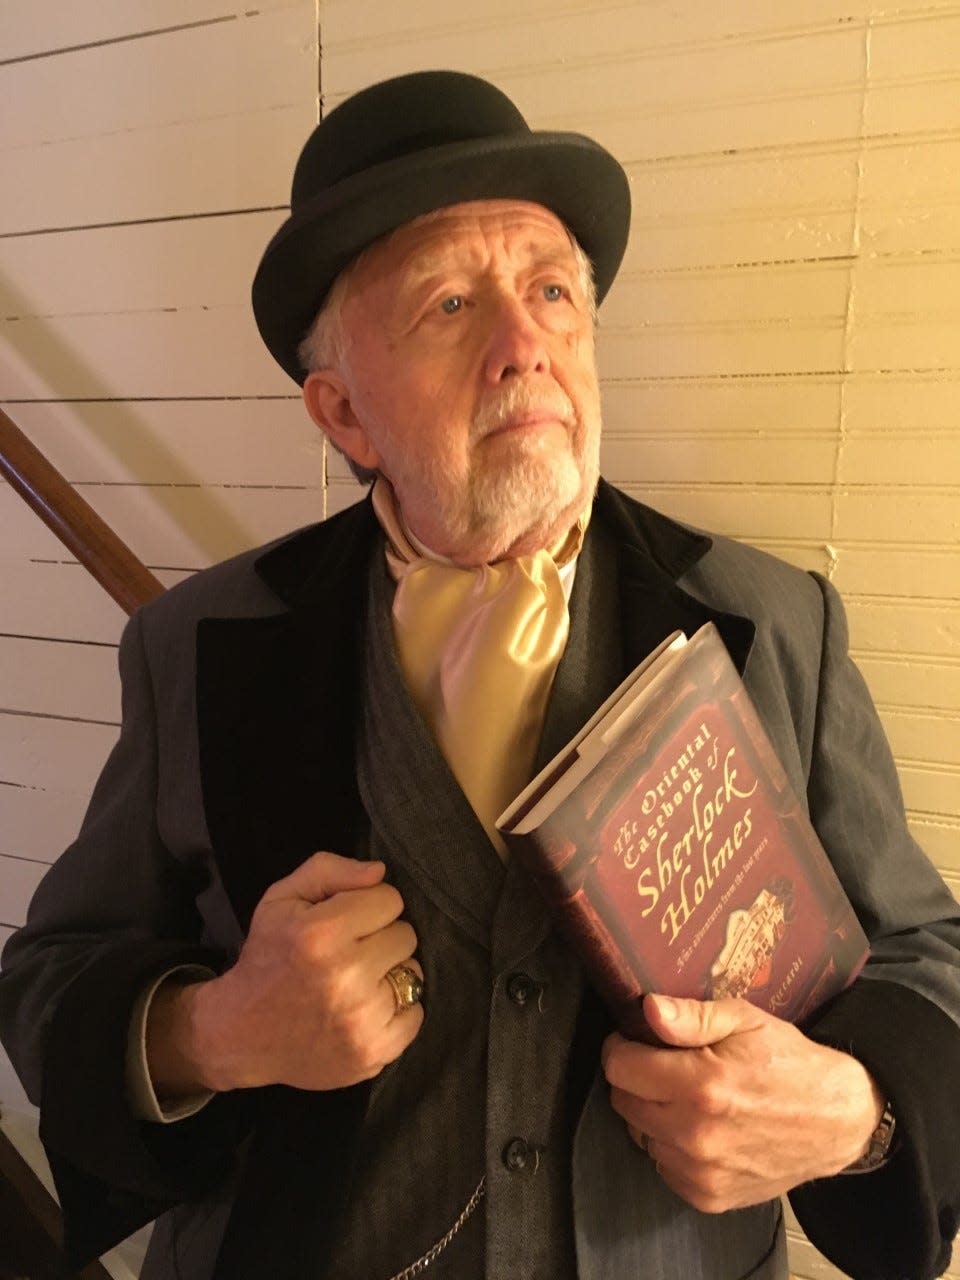 Historian Chris Hart of Port Washington will portray Sir Arthur Conan Doyle on July 9 at Stories on the Steps at the Reeves Museum.